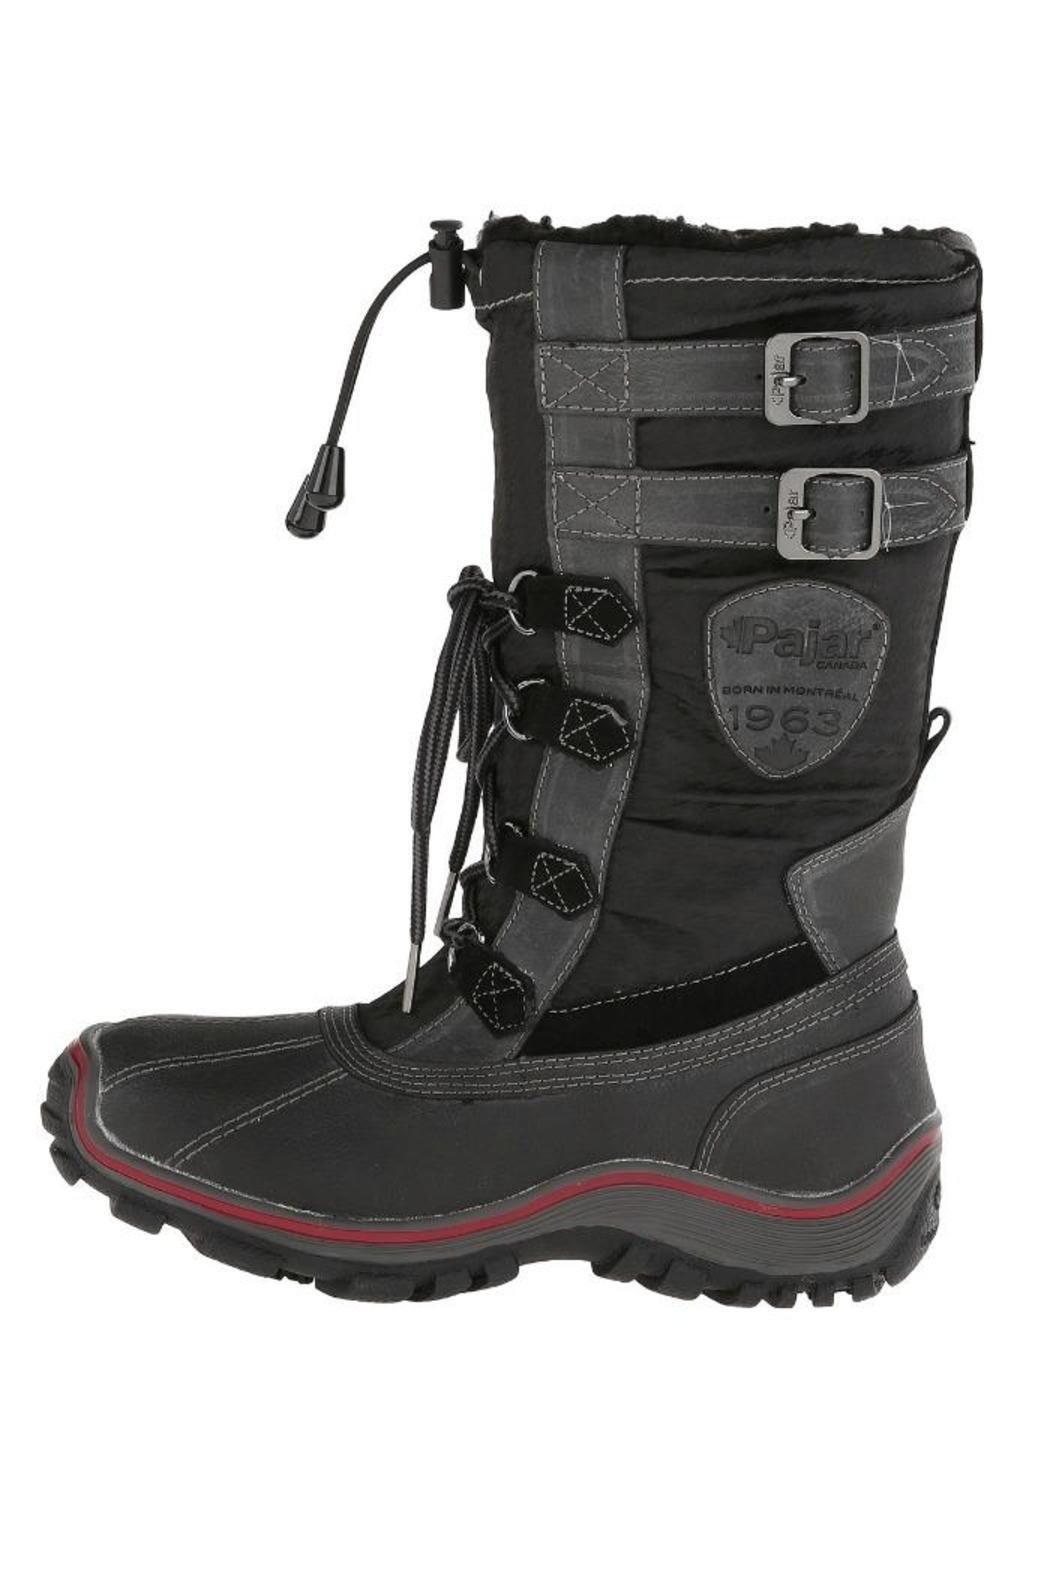 A black Pajar Adriana Women's Winter Snow Waterproof boot with red trim, featuring lace-up front and buckle details, designed for cold weather.